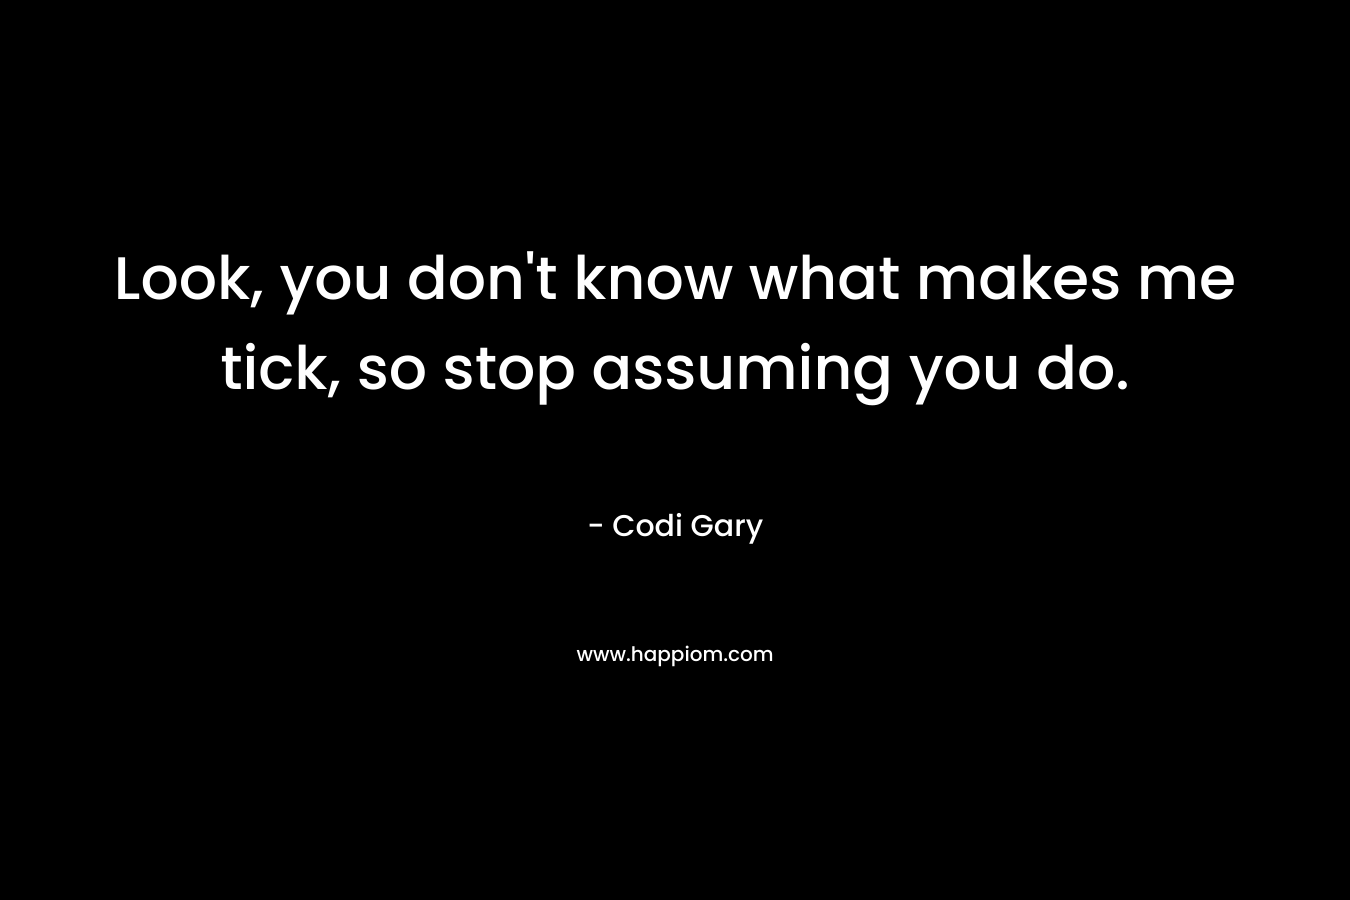 Look, you don’t know what makes me tick, so stop assuming you do. – Codi Gary